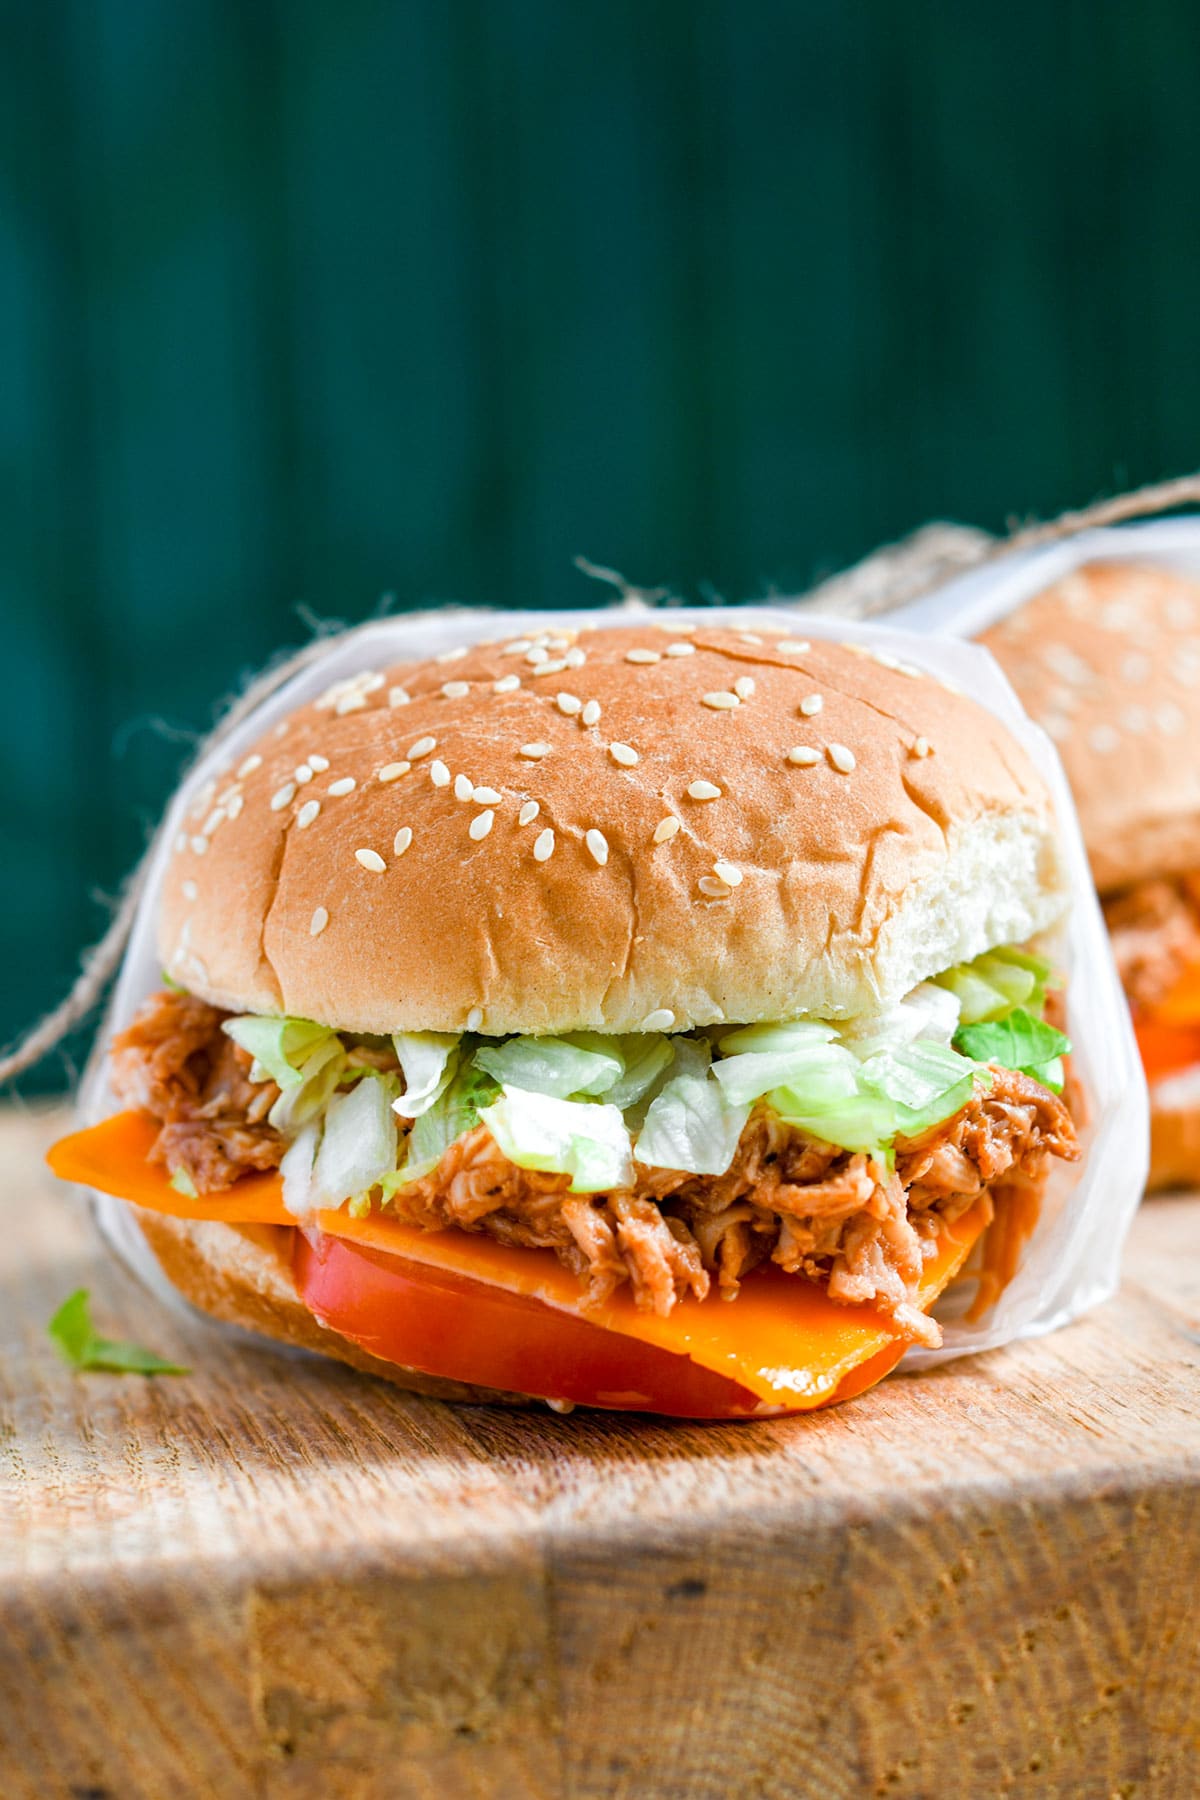 a shredded chicken sandwich on a wooden board and a green backdrop.